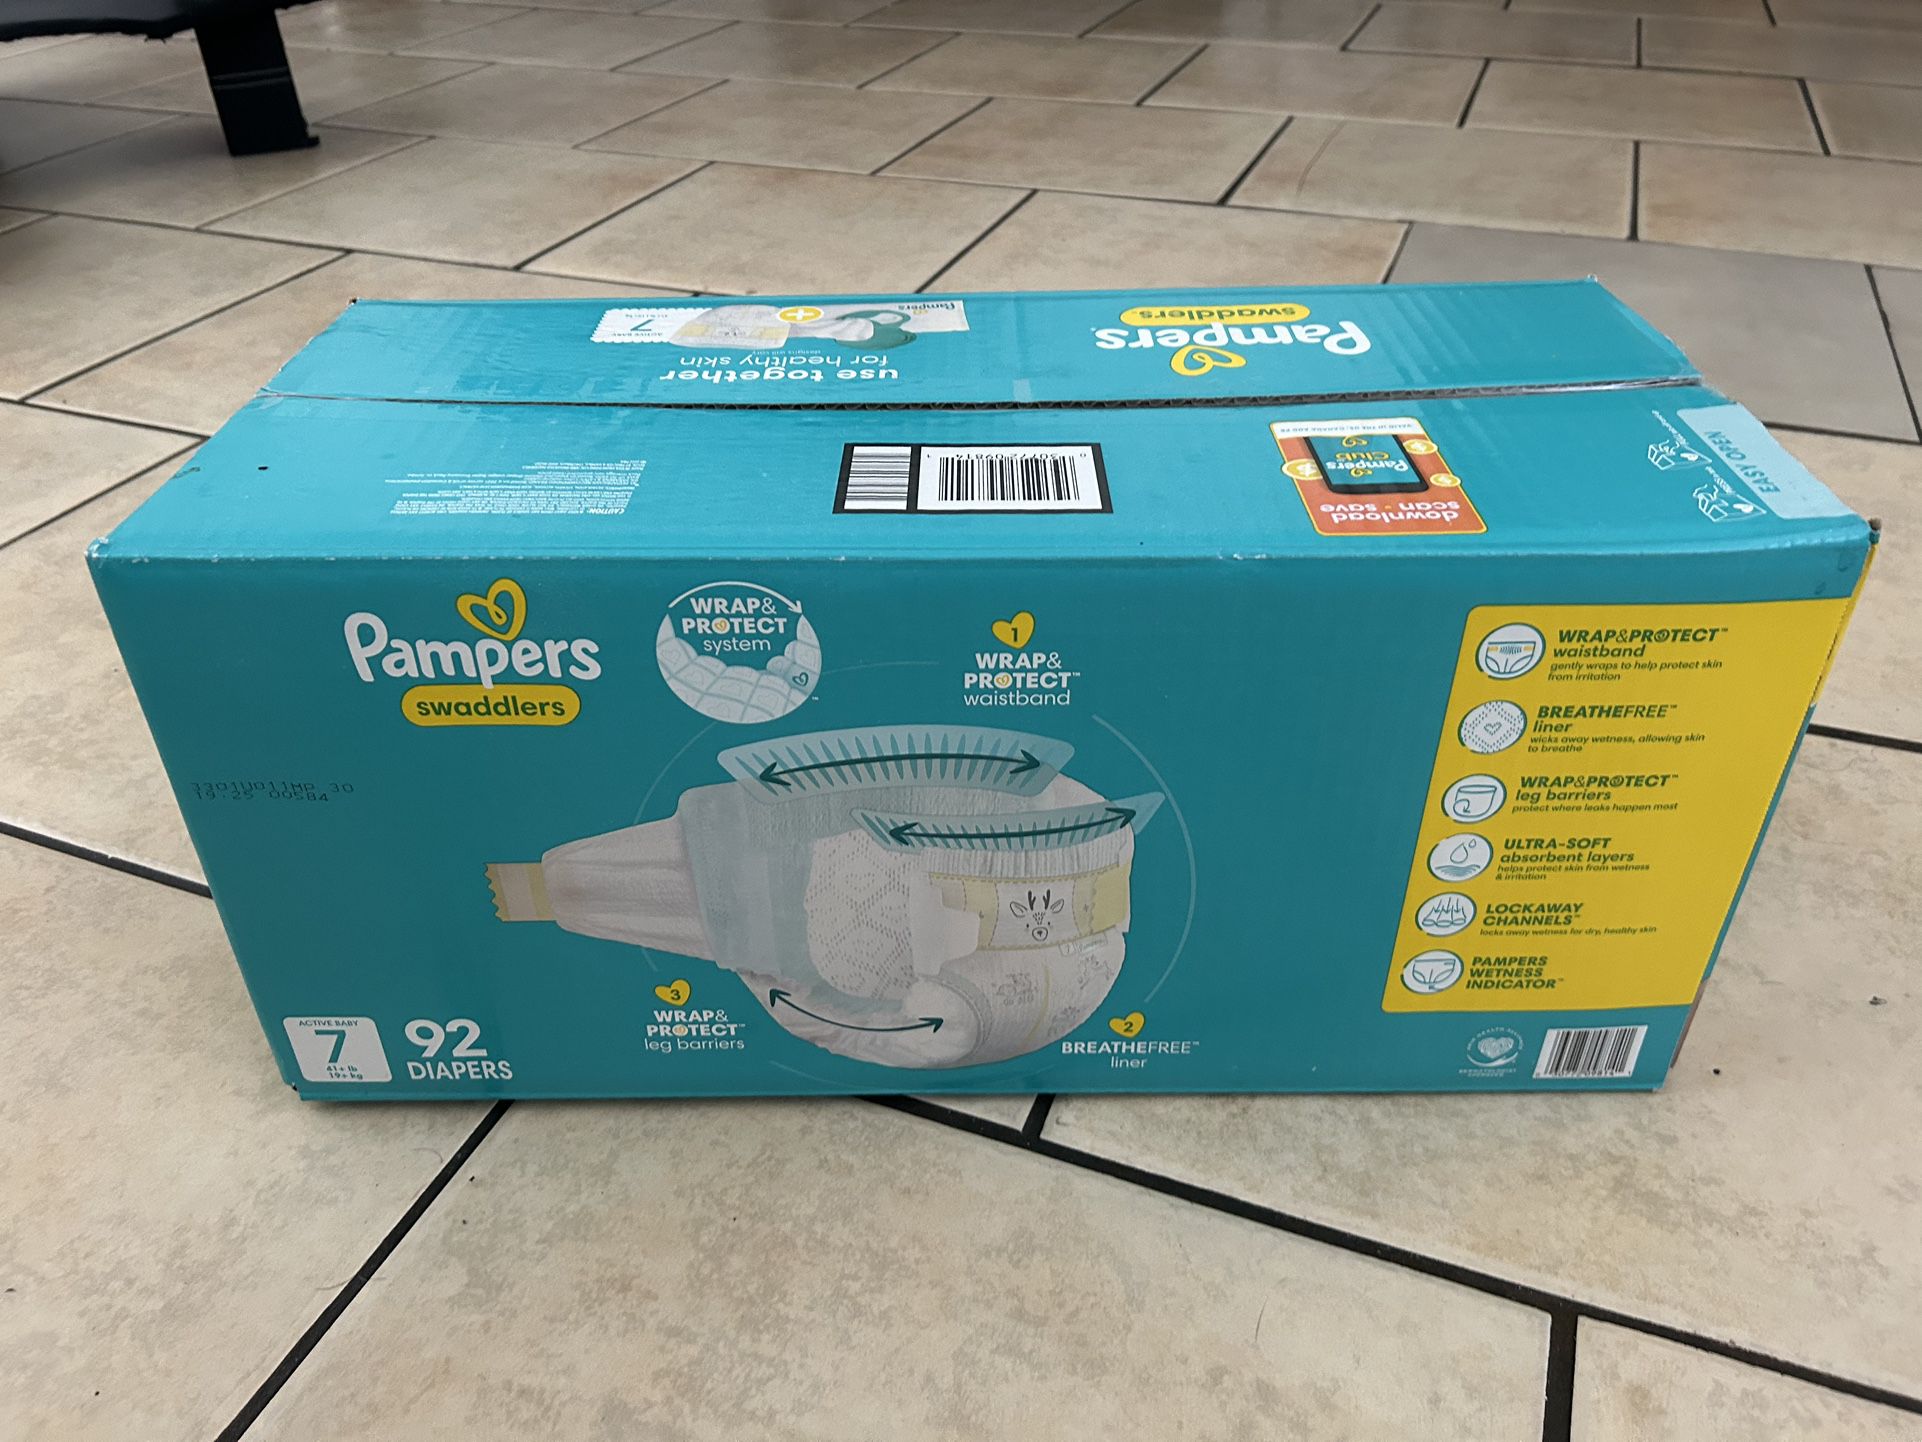 Pampers diapers